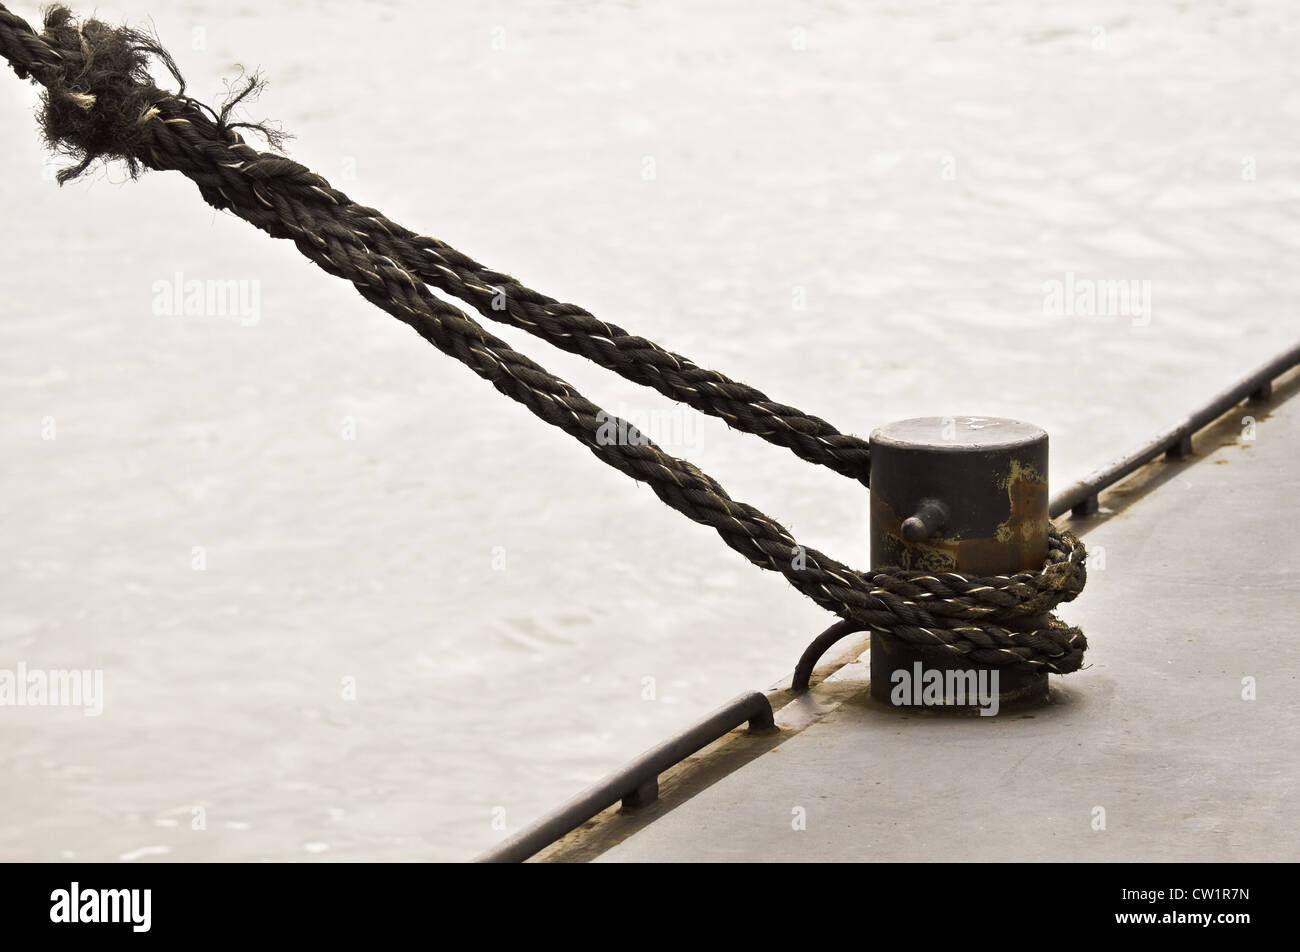 Ship rope and mooring-mast with desaturated colors Stock Photo